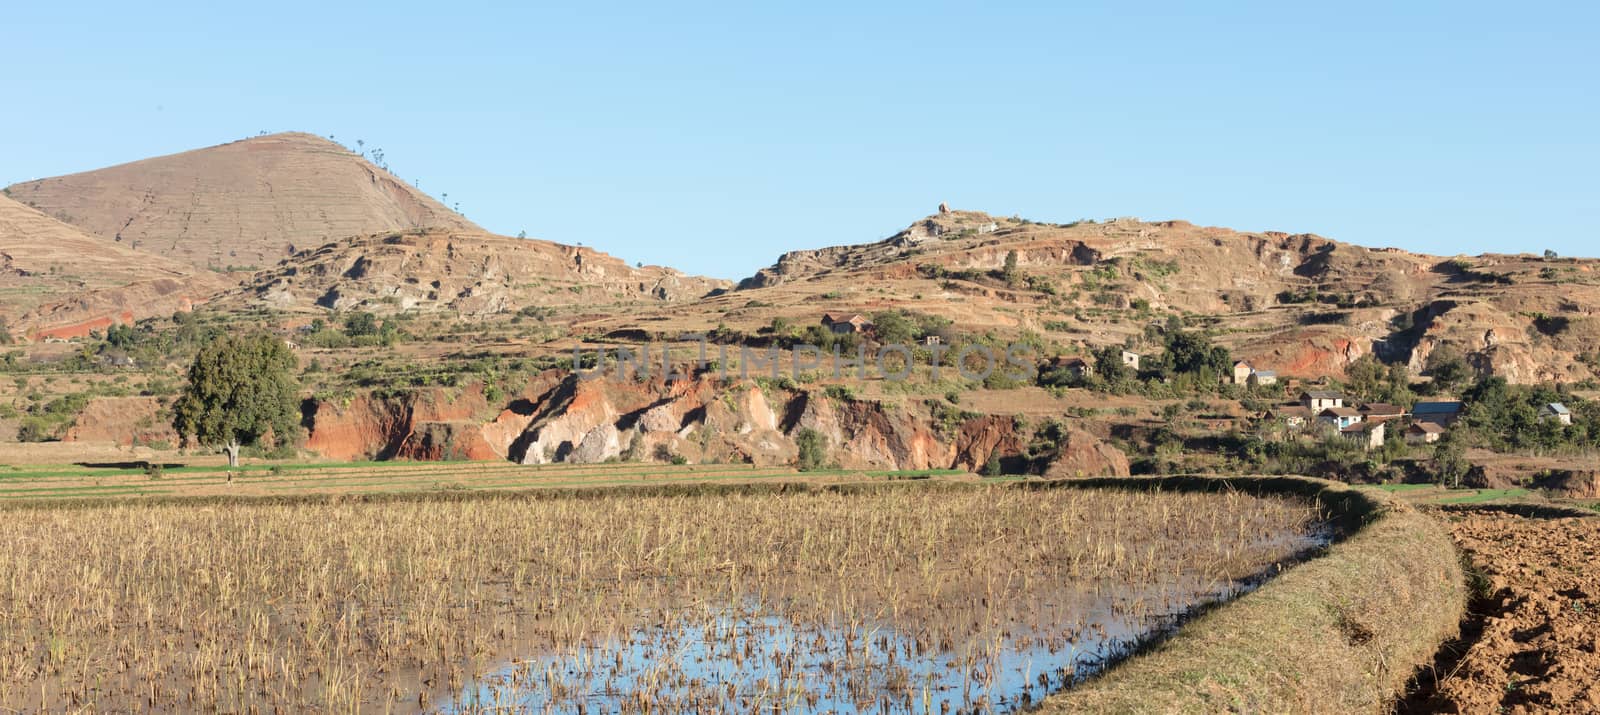 Agricultural fields in Madagascar, food for the local people